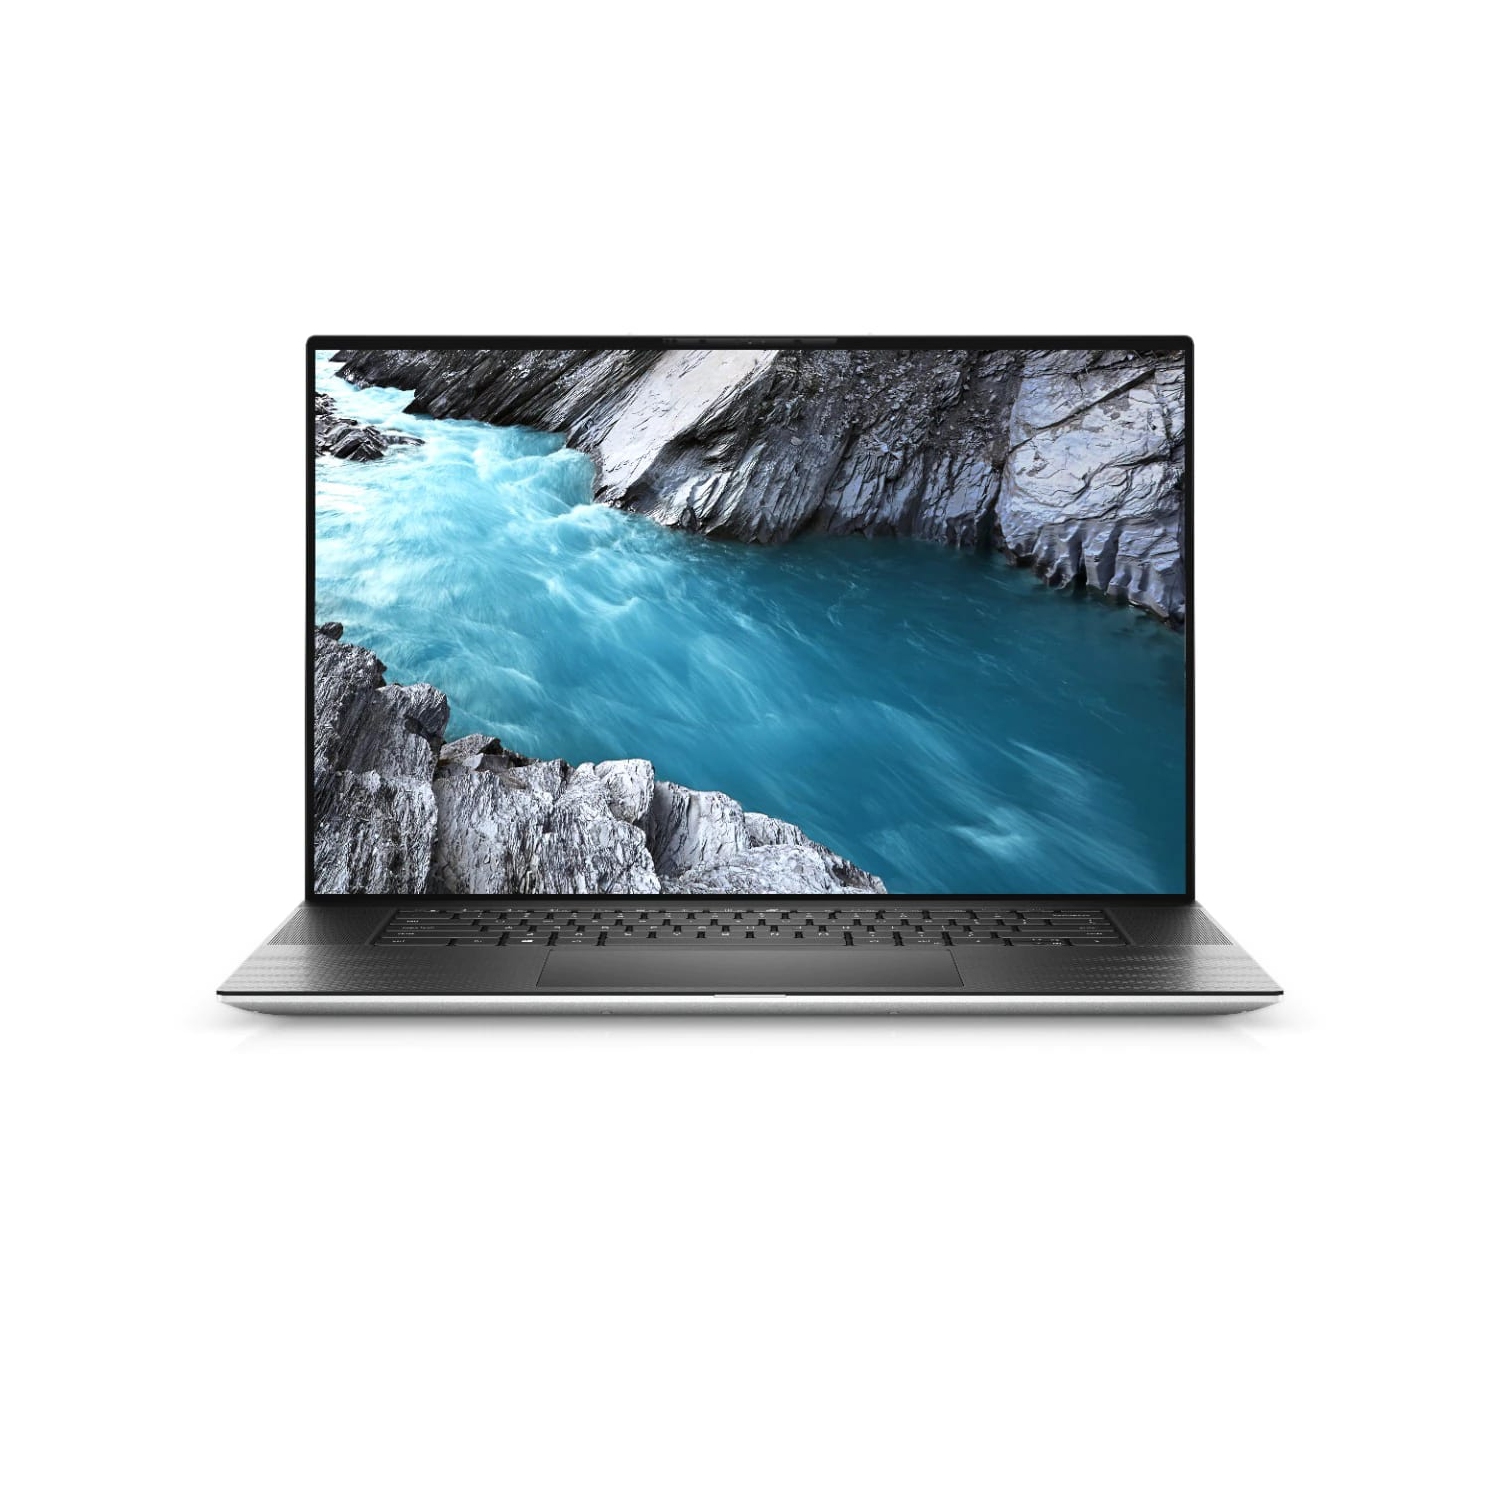 Refurbished (Excellent) - Dell XPS 17 9700 Laptop (2020) | 17" 4K Touch | Core i9 - 1TB SSD - 32GB RAM - RTX 2060 | 8 Cores @ 5.3 GHz - 10th Gen CPU Certified Refurbished